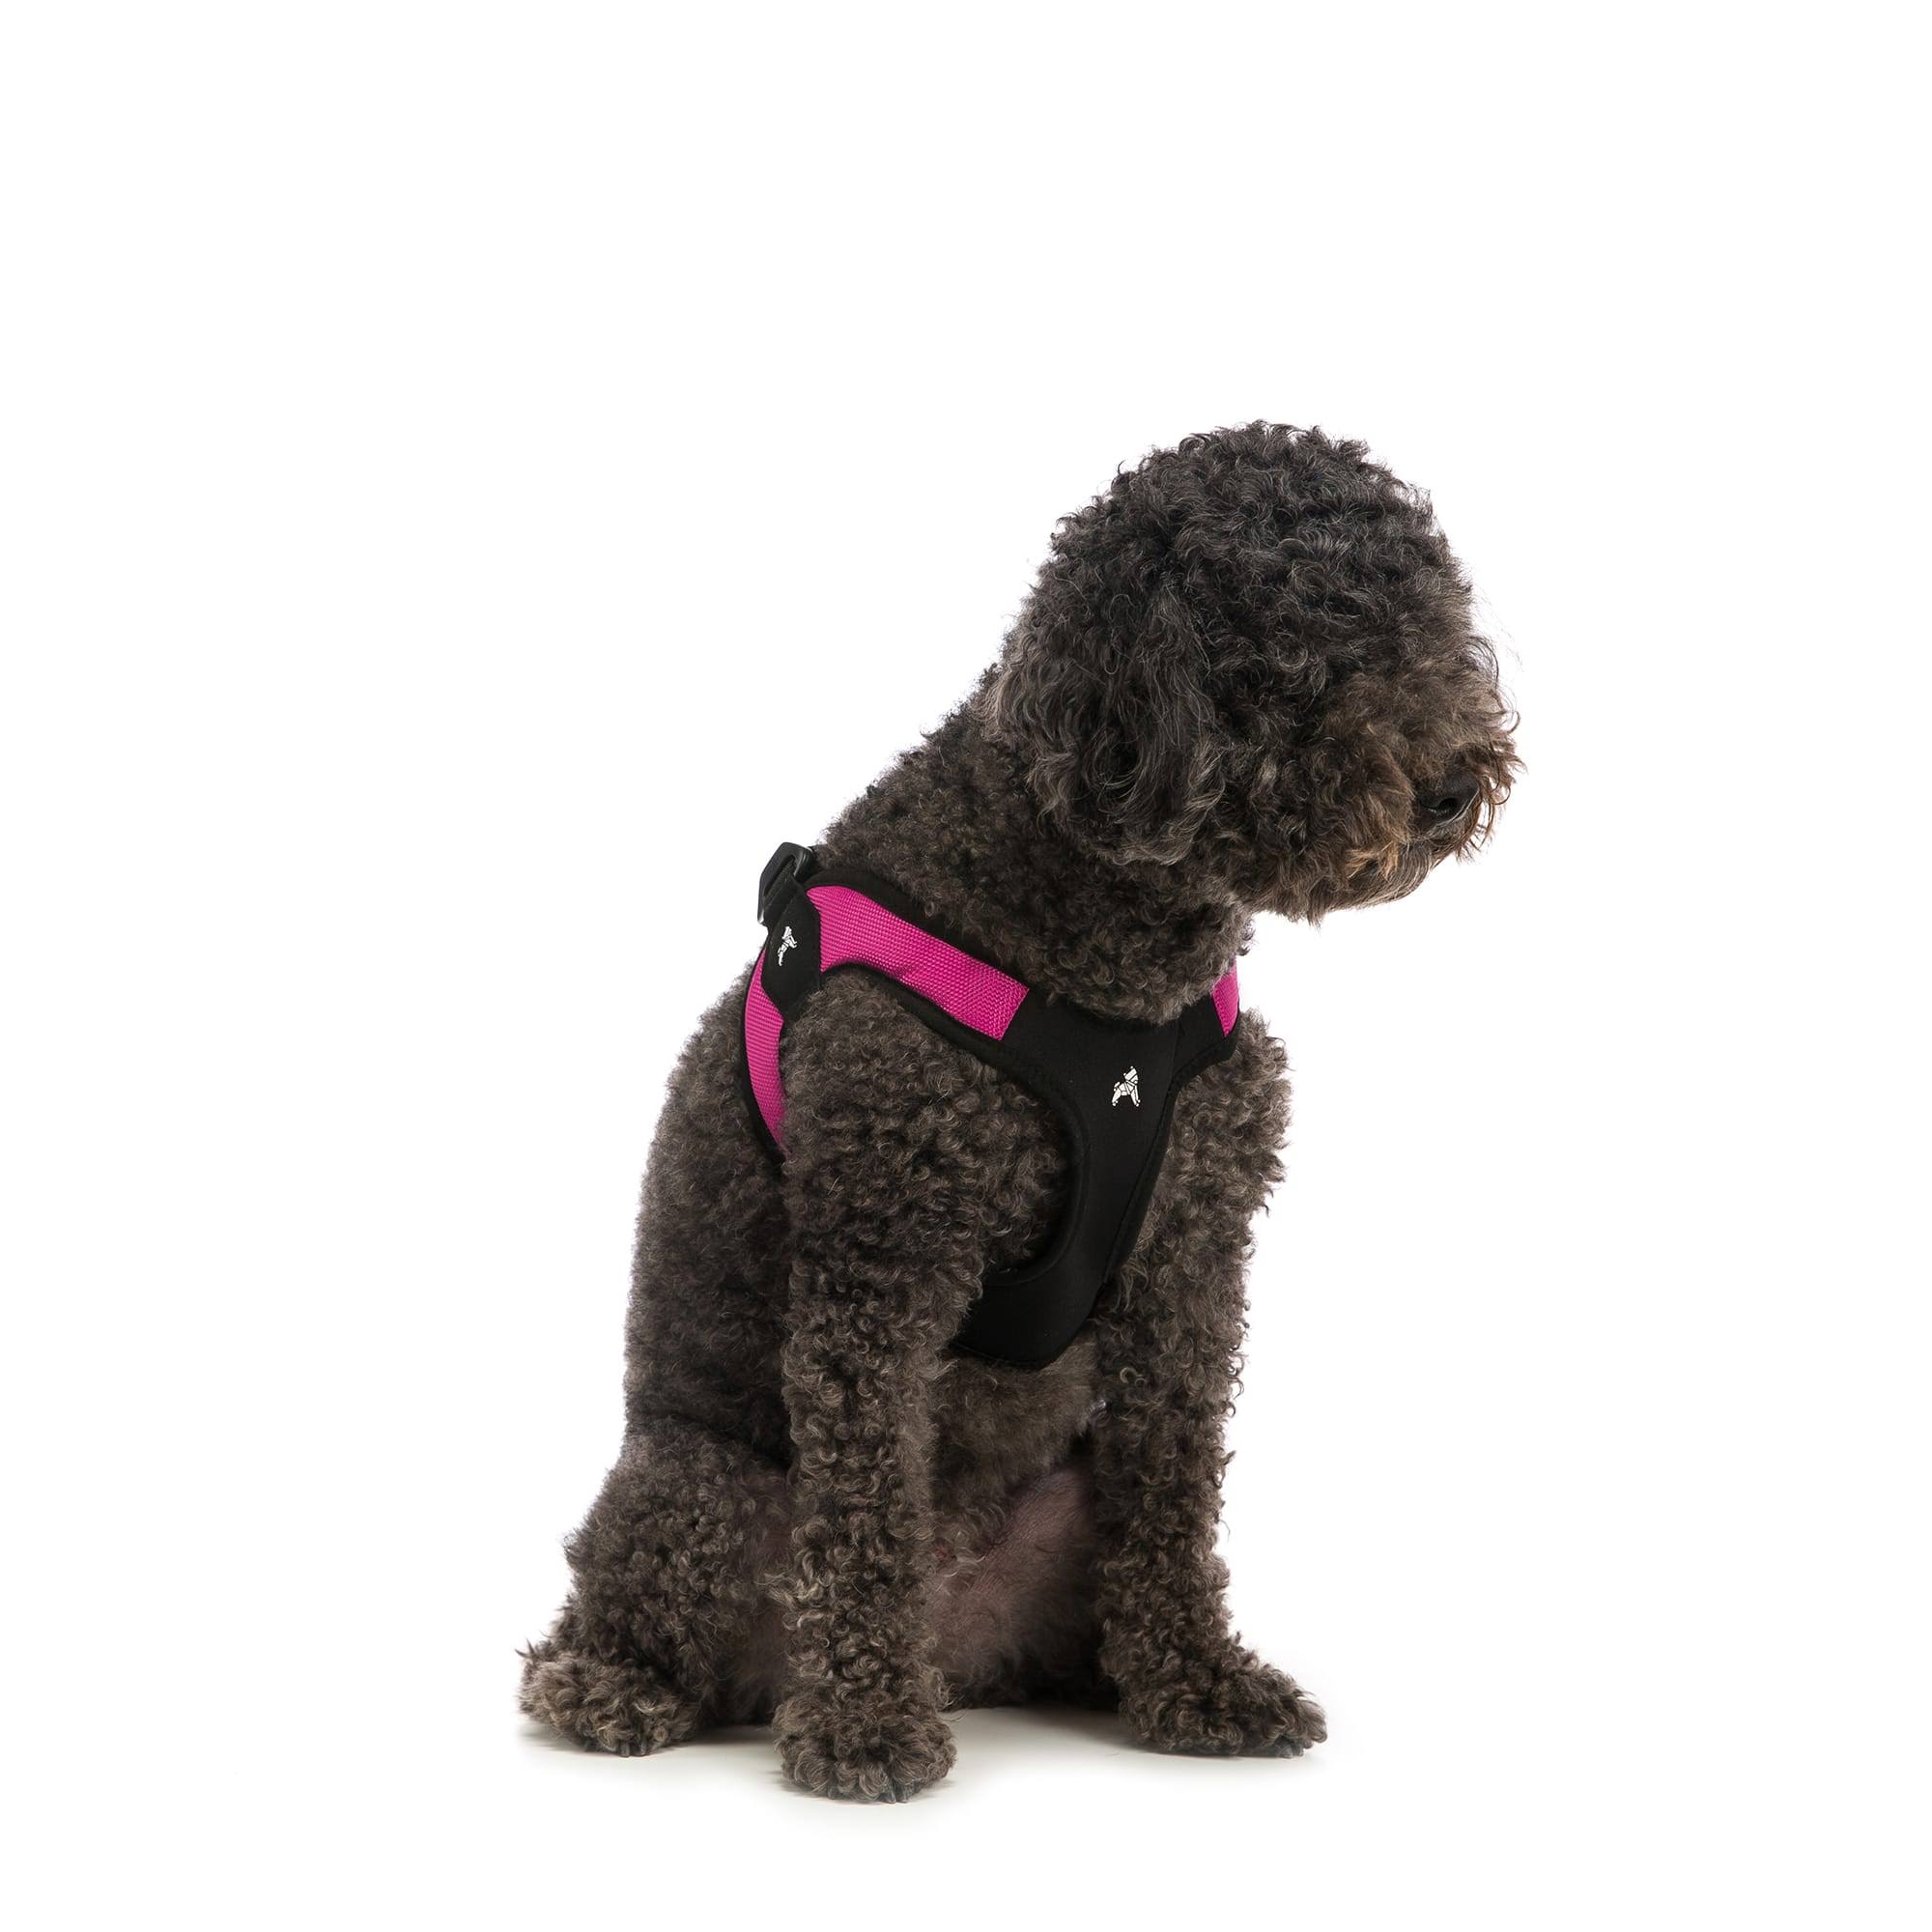 (X-Small, Hot Pink) - Gooby Escape Proof [Escape Free] Easy Fit Dog Harness For Dogs That Likes to Escape Their Harnesses